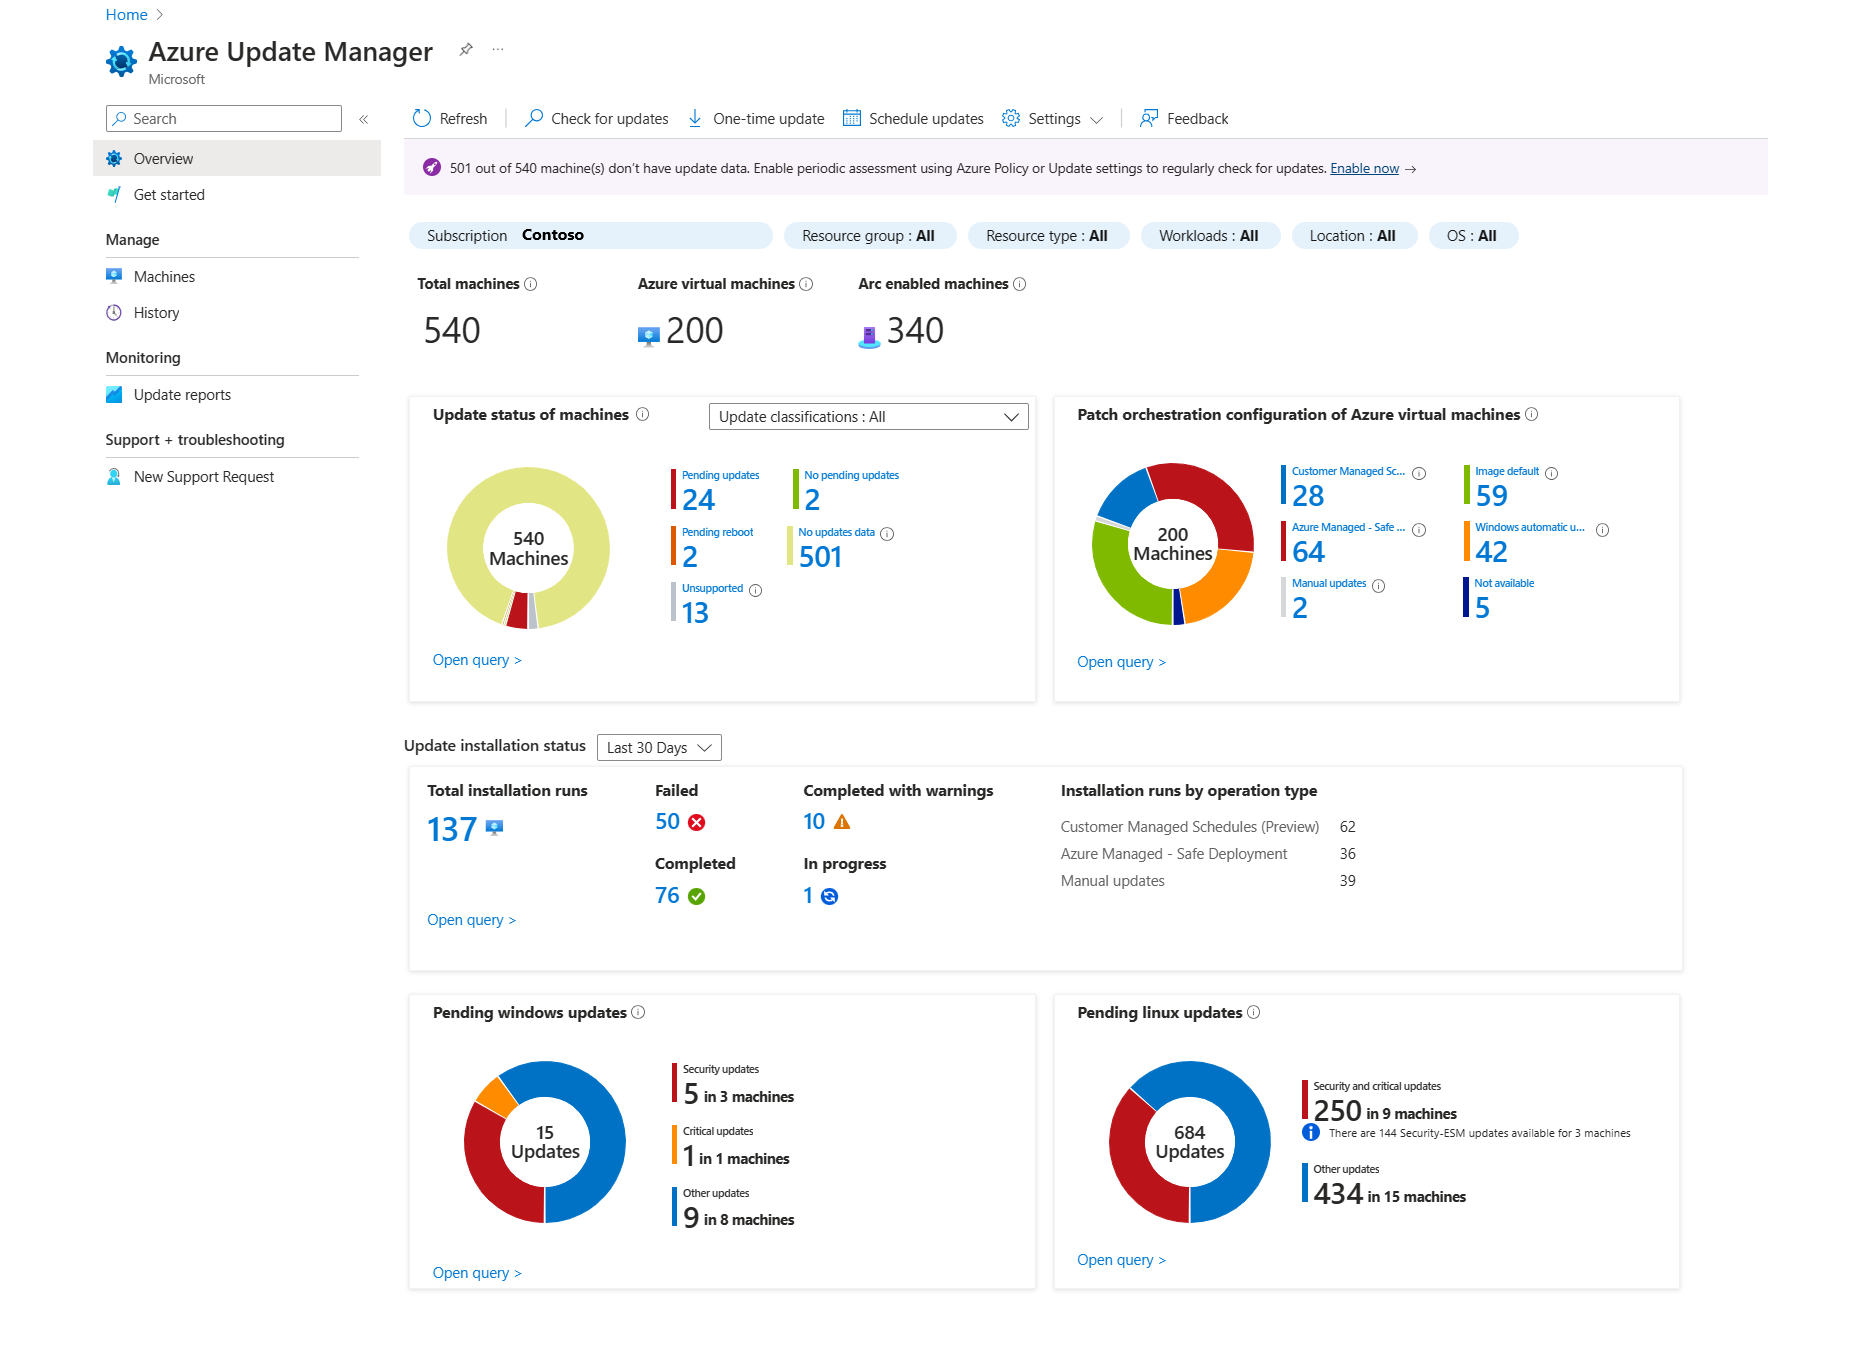 Screenshot that shows the Update Manager Overview page in the Azure portal.